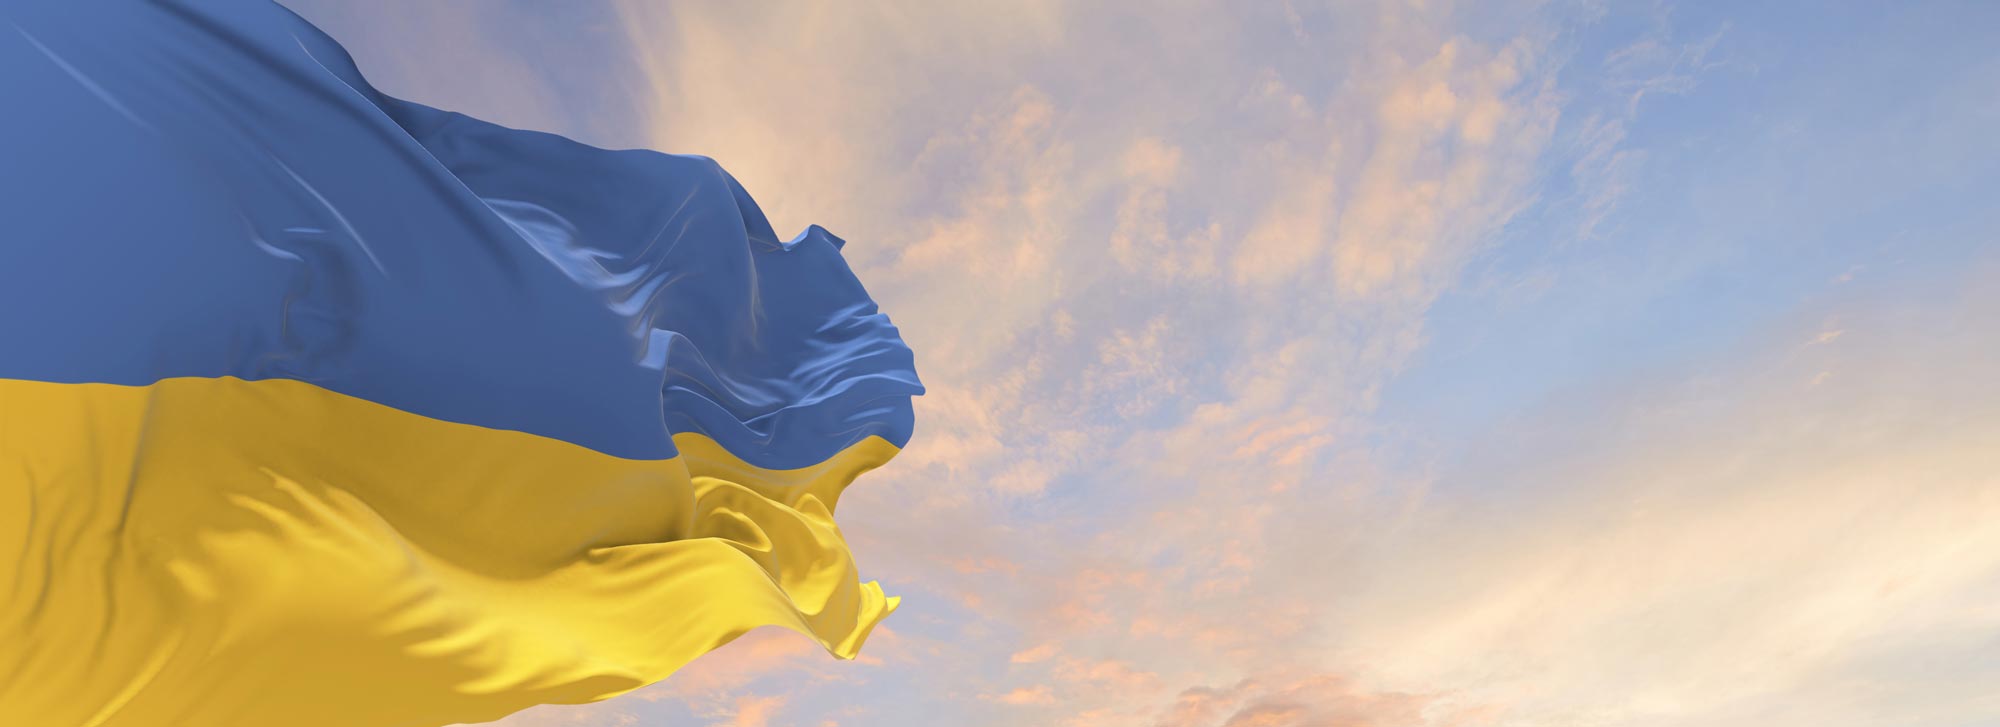 The Ukrainian flag blowing against the sky